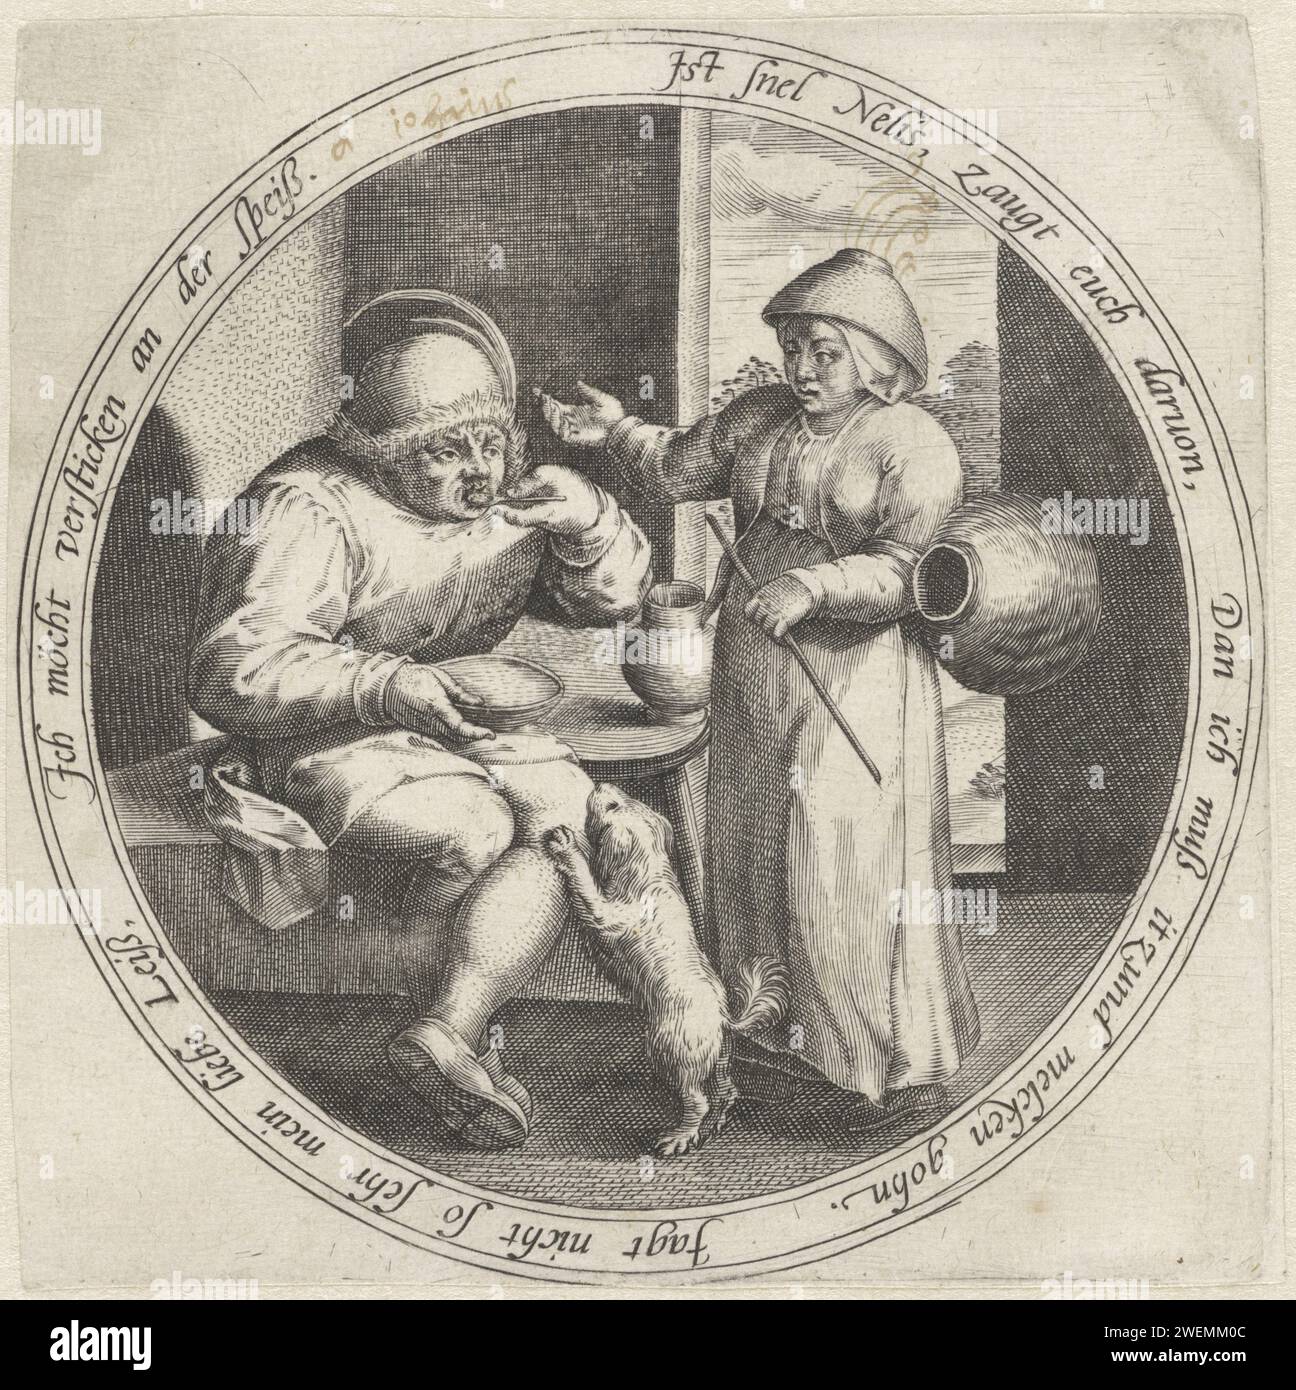 Boer pair in an interior, Anonymous, After Marten van Cleve (I), 1555 - 1631 print Medallion with a farmer's couple in an interior. The man eats from a bowl while a dog jumps against him. Next to him, the woman is standing on her arm with an empty jug and a stick in her hand. Around an ambiguous edge in German.  paper engraving milkmaid. farmers. dog. eating. sensuality Stock Photo